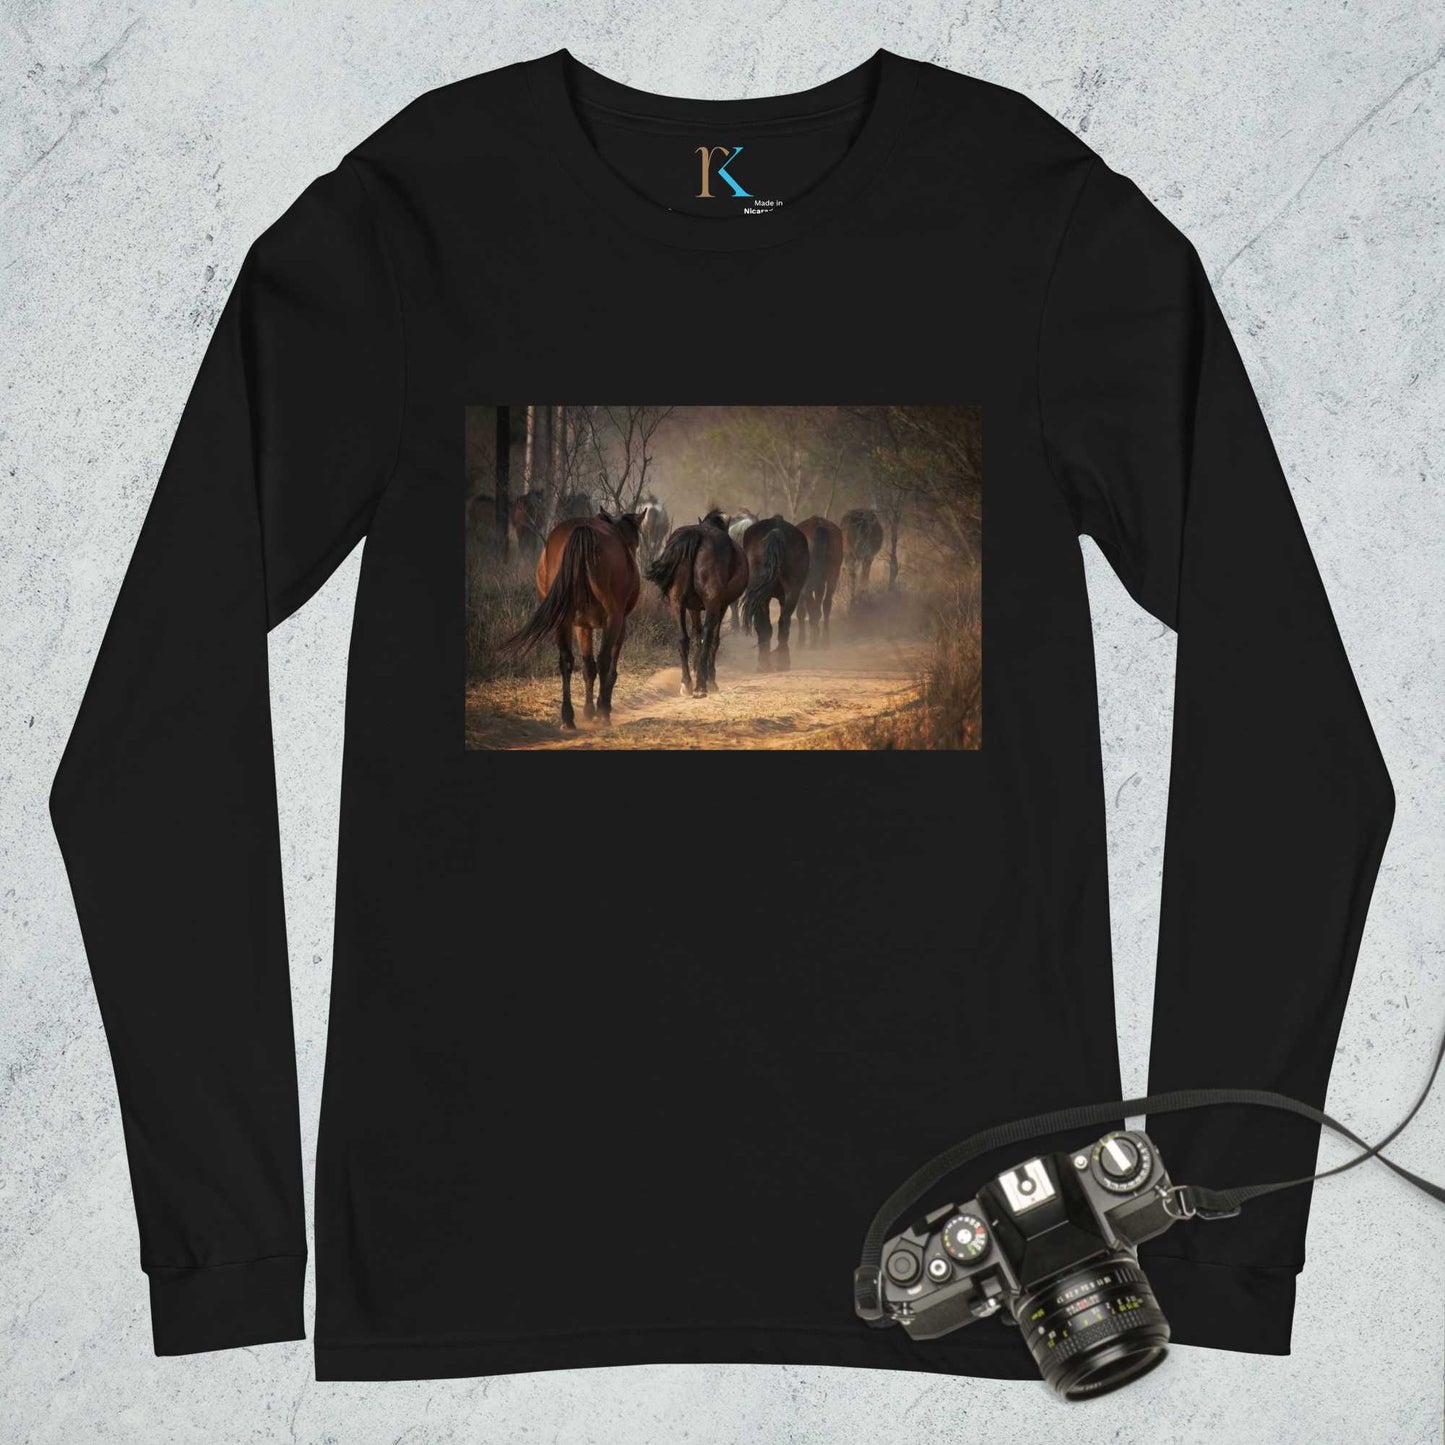 Back to the Plains - Long Sleeve Tee